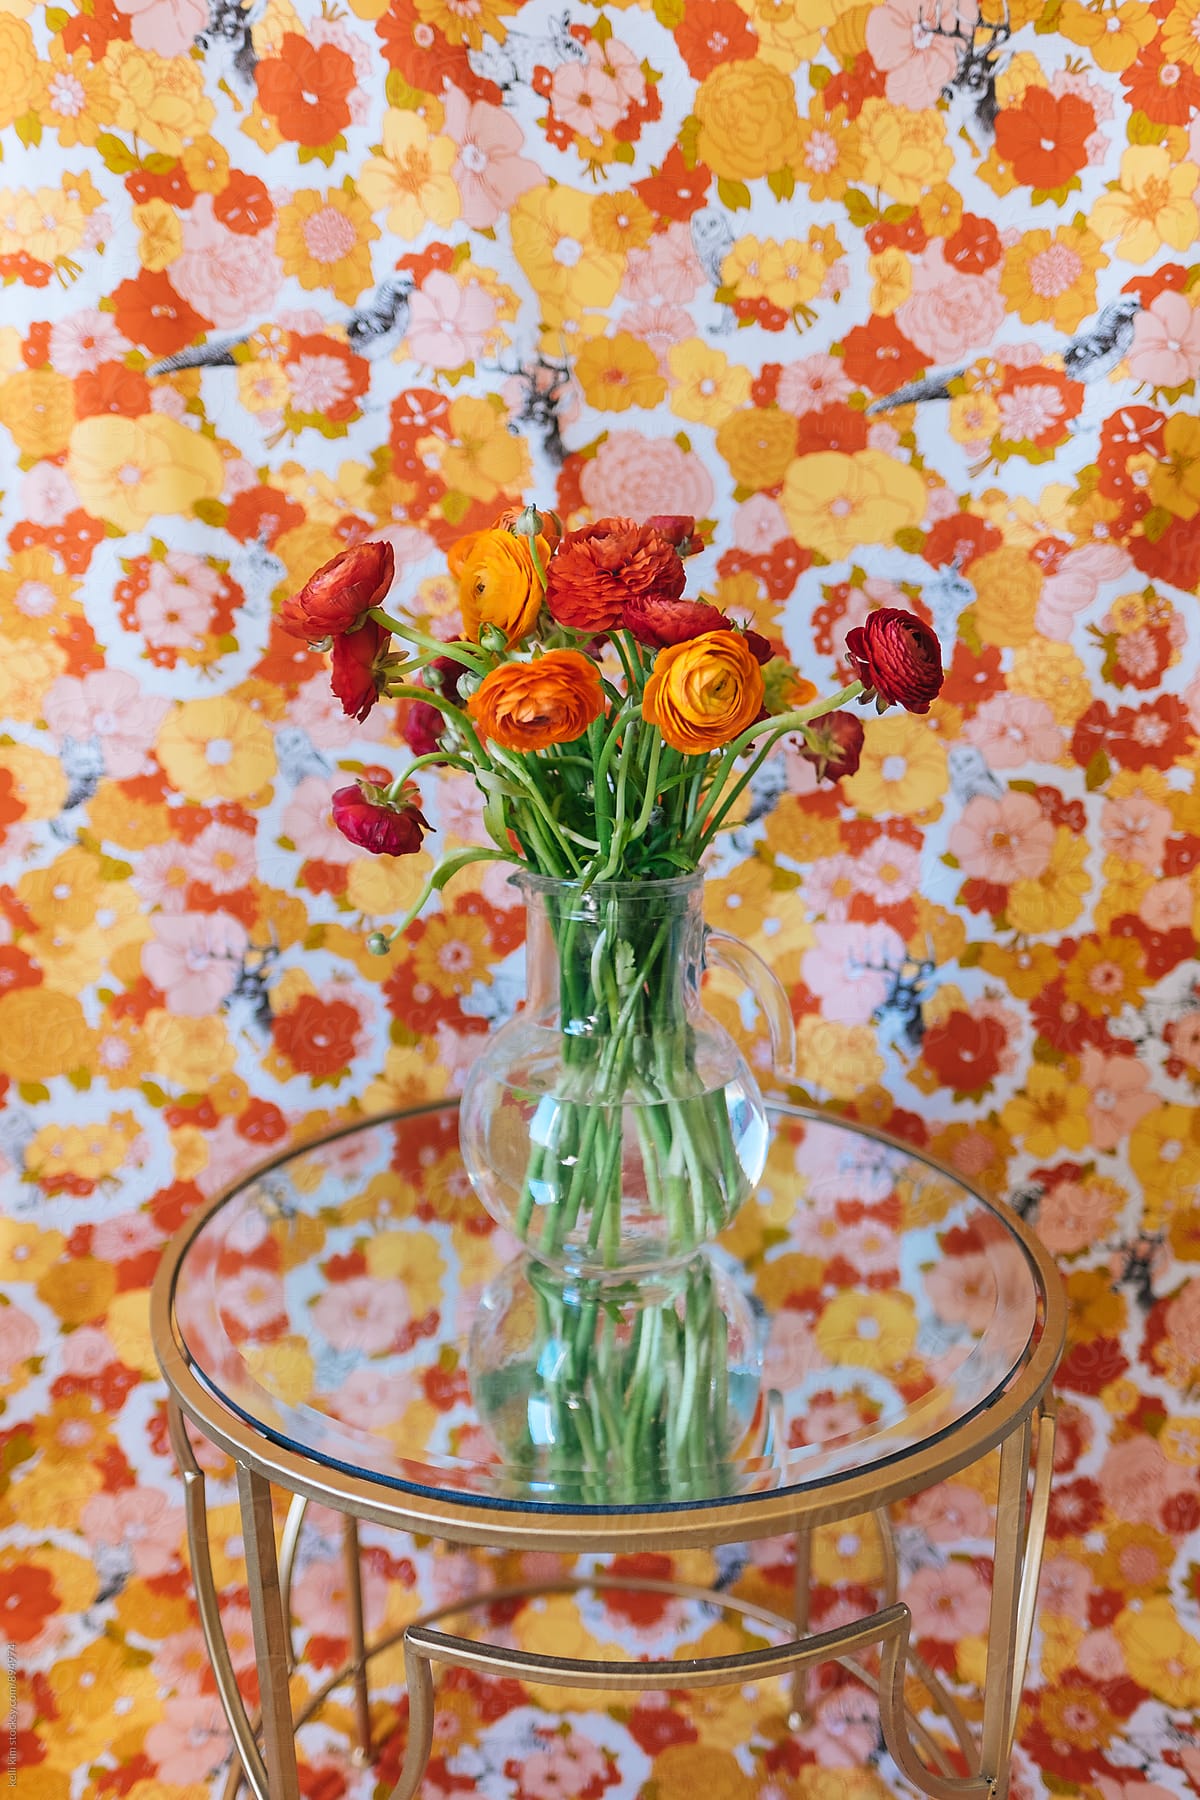 Bouquet of red and orange flowers on mirrored table